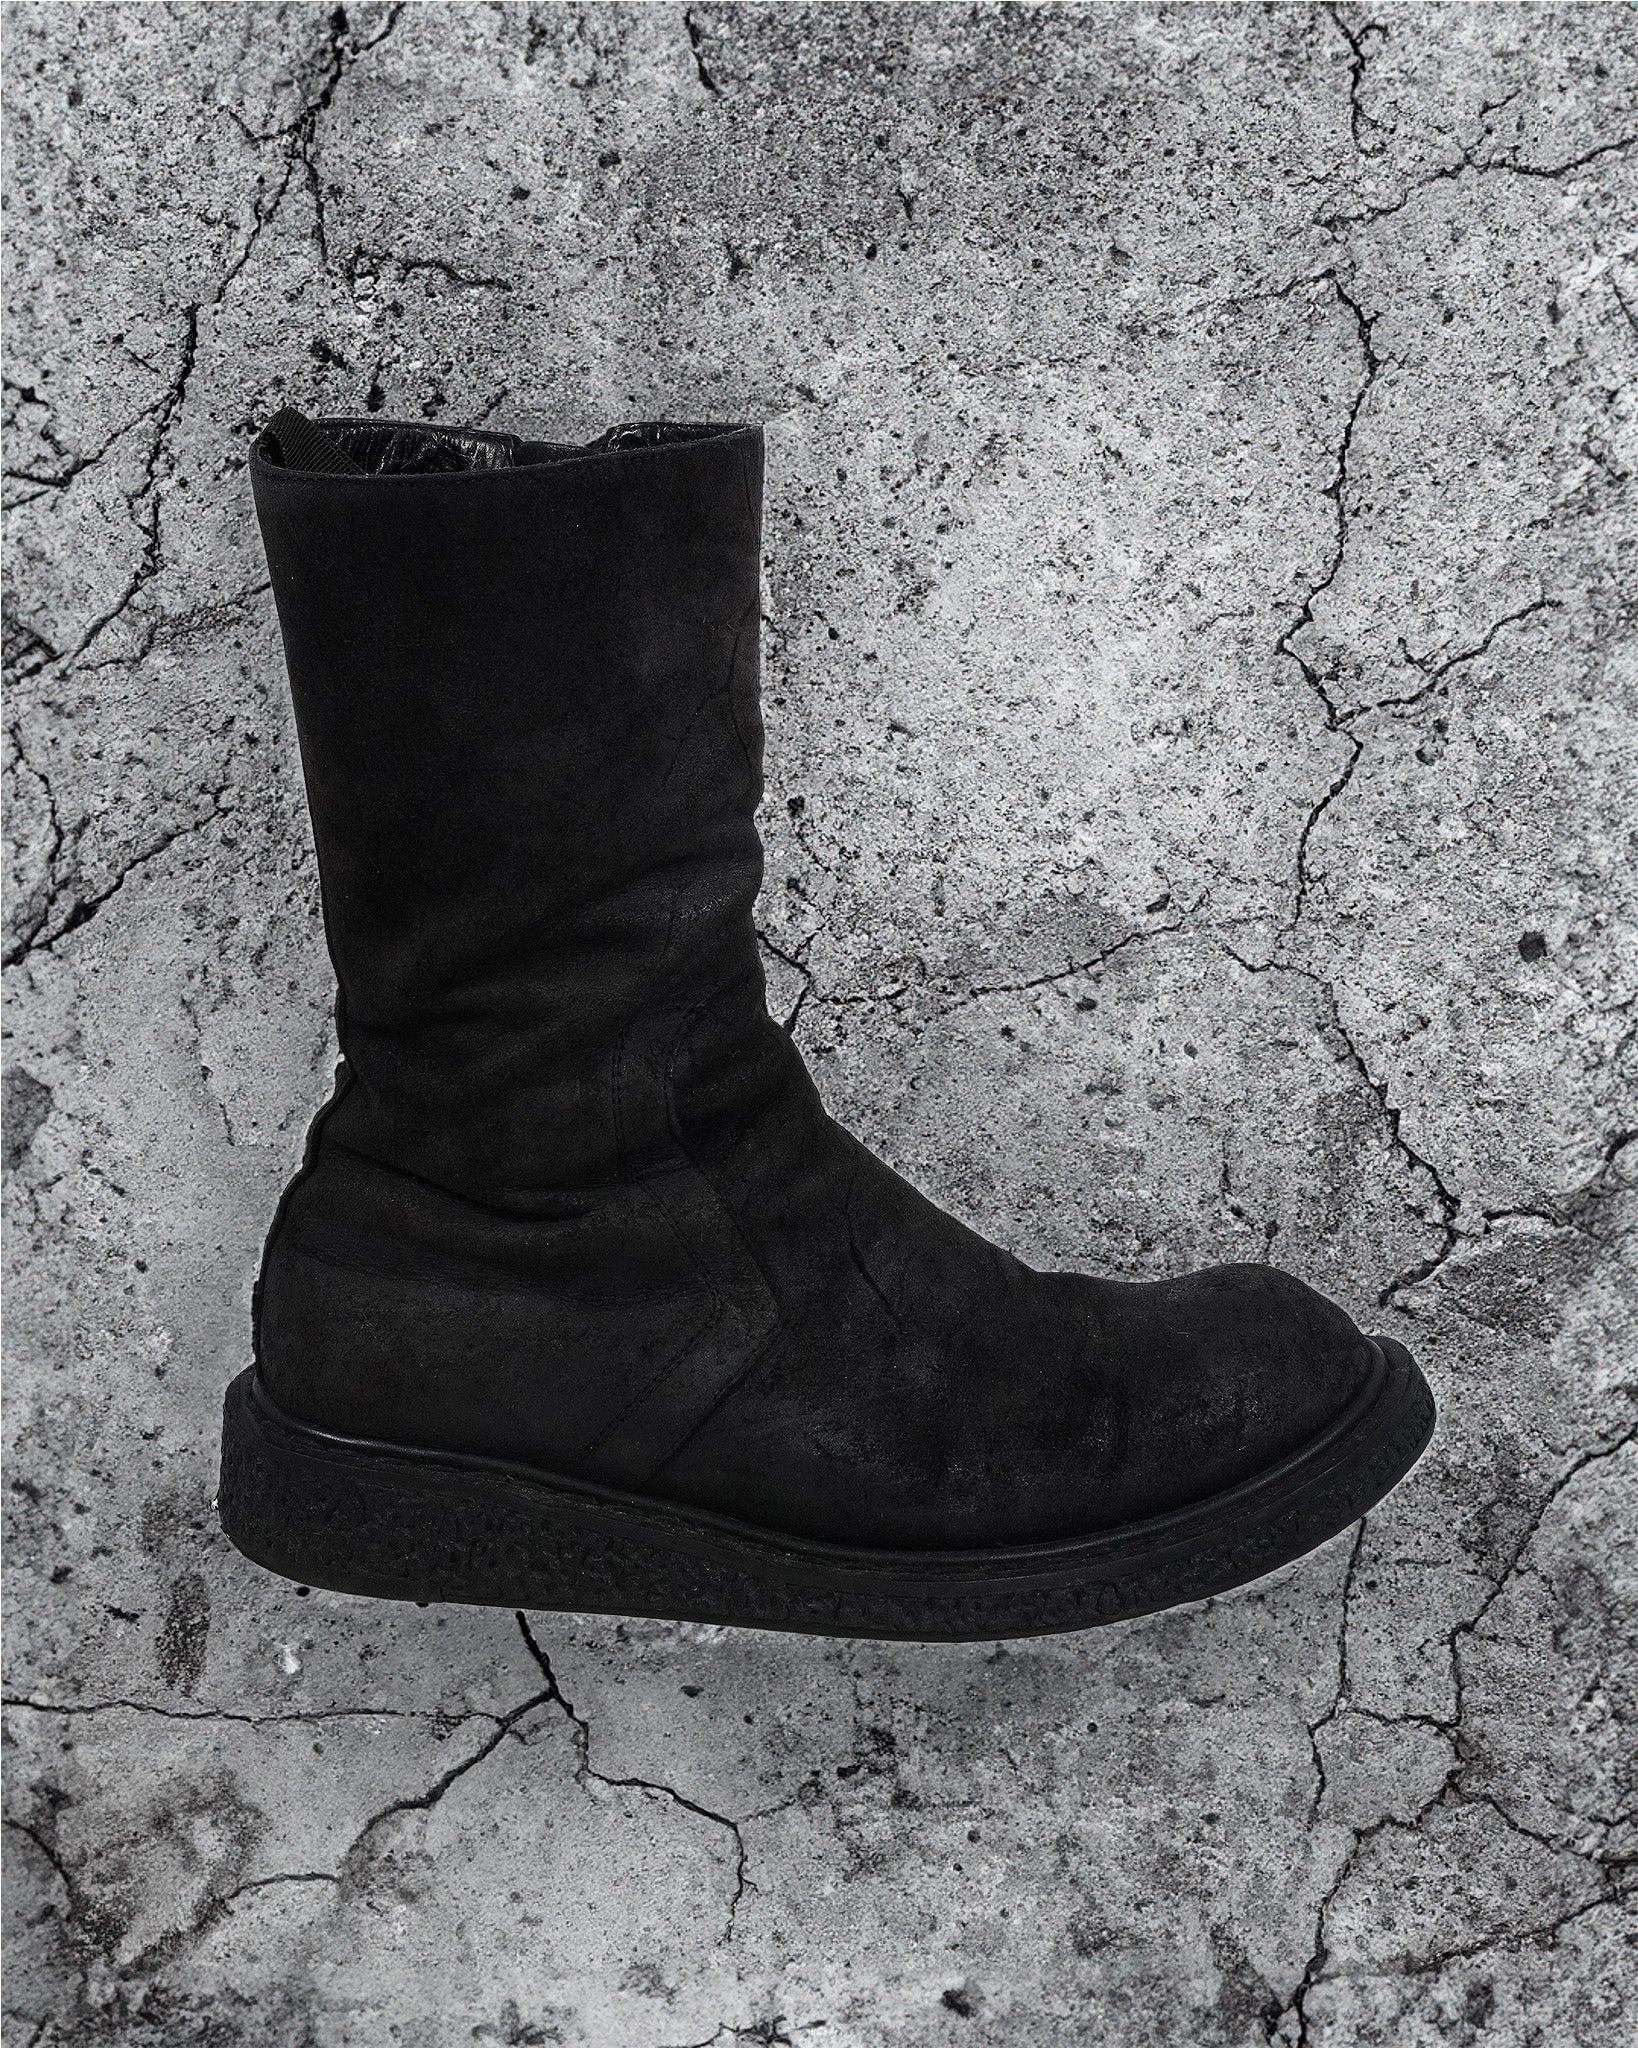 Rick Owens “Blistered” Leather Creeper Boots - FW09 “Crust”